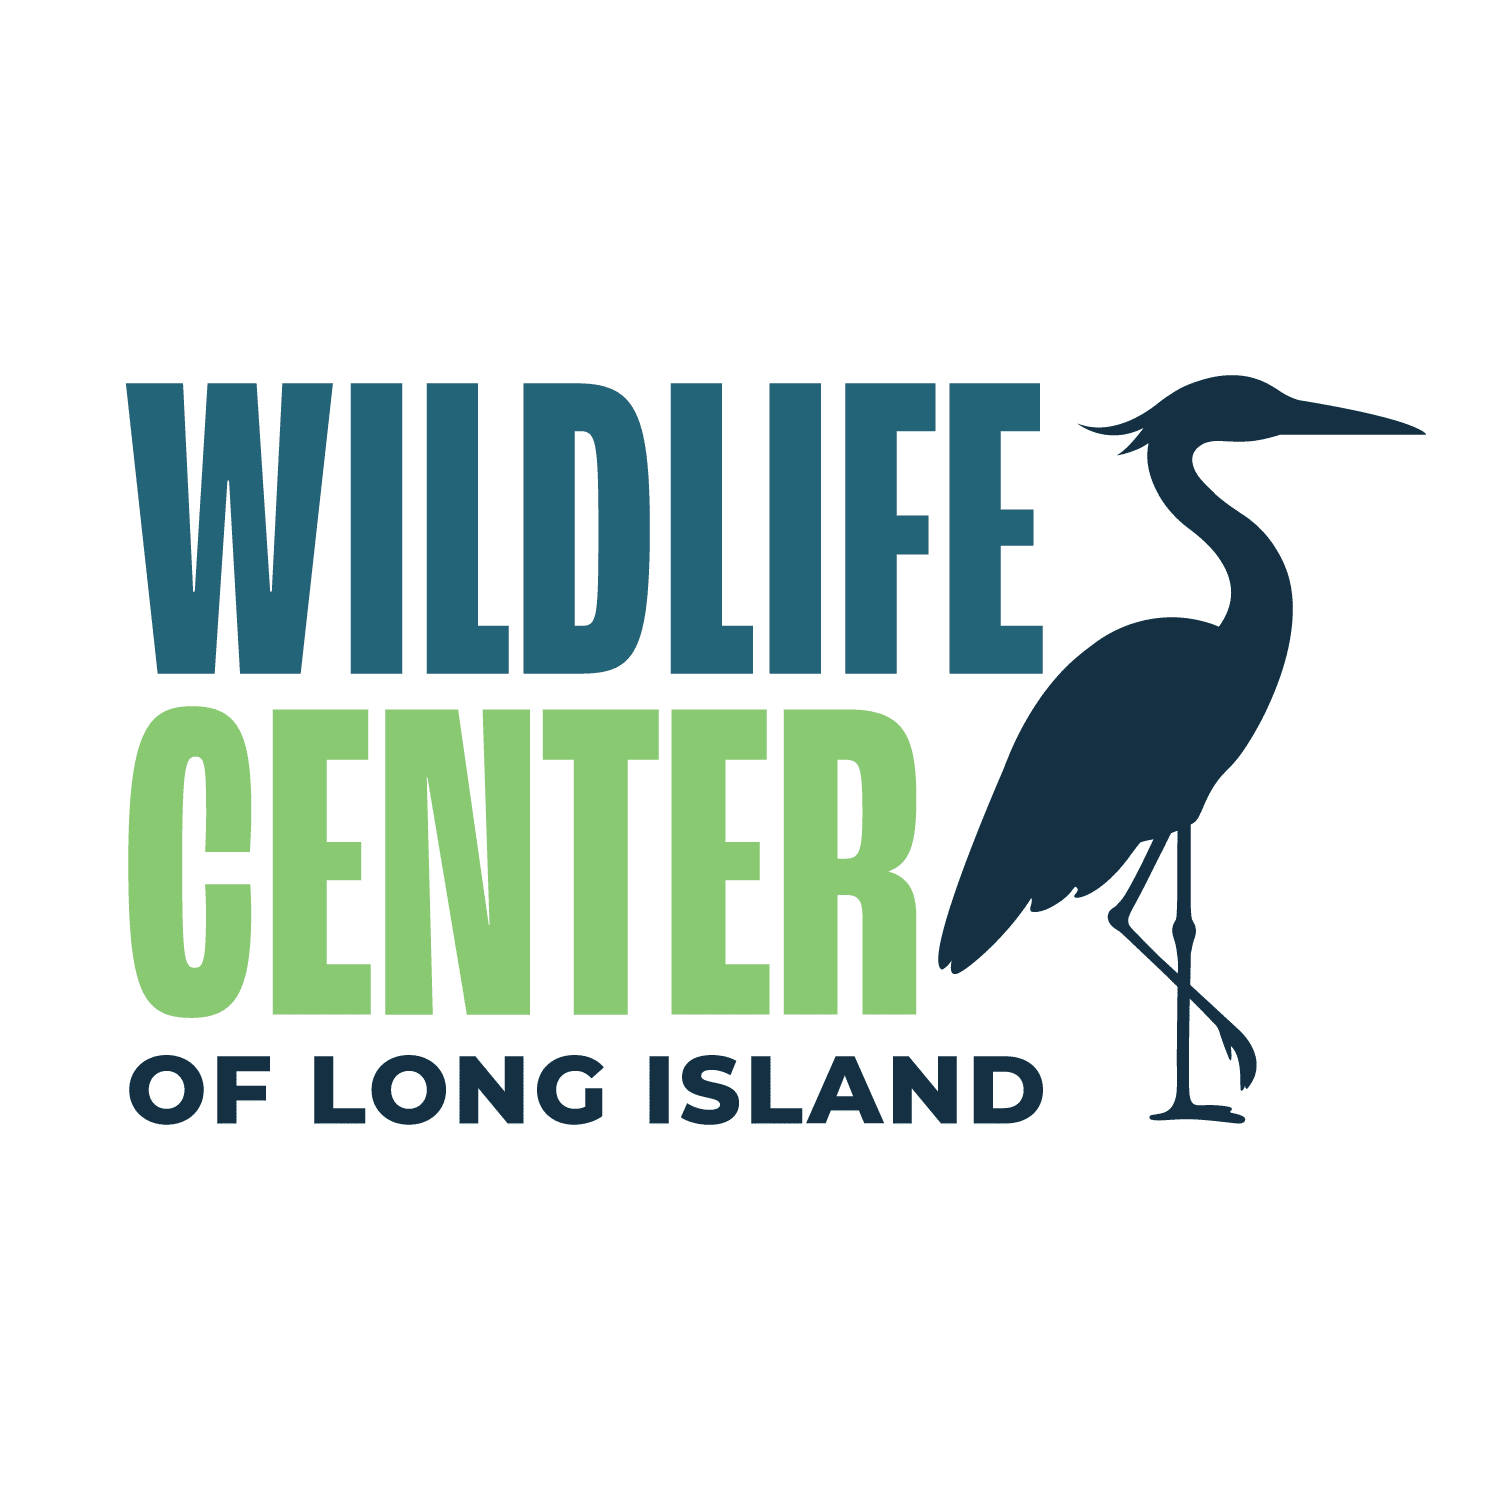 Image of a crane next to the words WILDLIFE CENTER OF LONG ISLAND, written in blue, green, and black